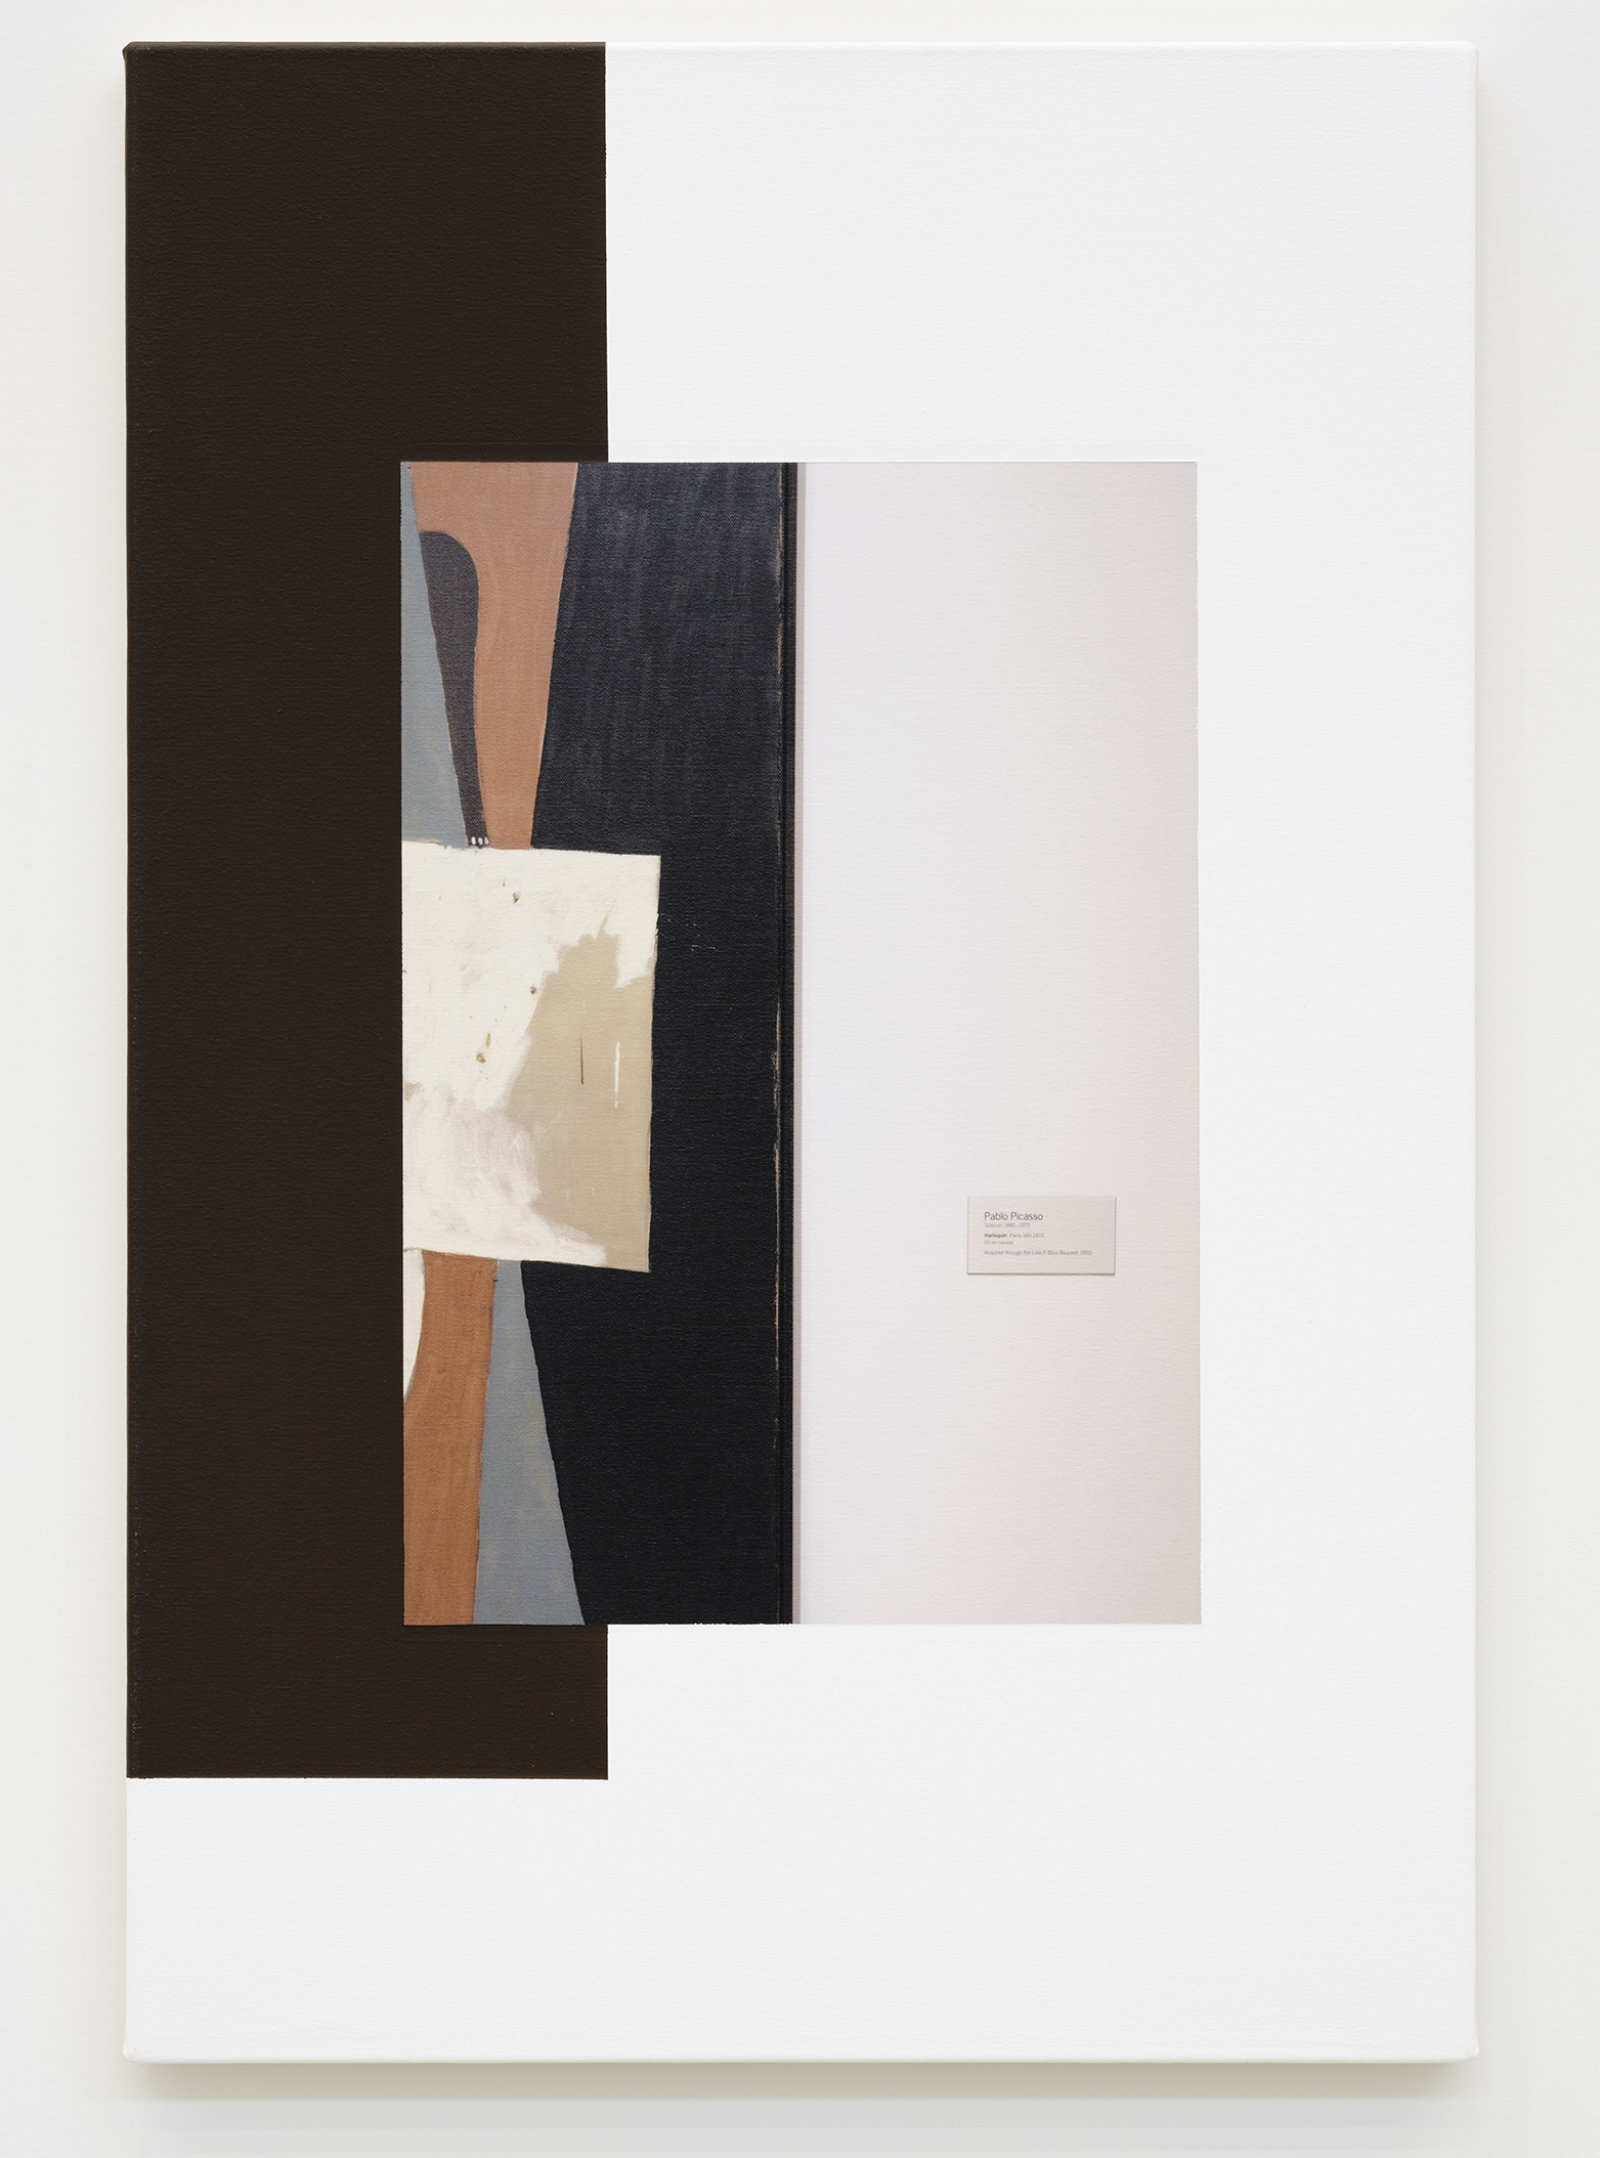 Ian Wallace, Abstract Composition (with Picasso), 2011, photolaminate with acrylic on canvas, 36 x 24 in. (91 x 61 cm)